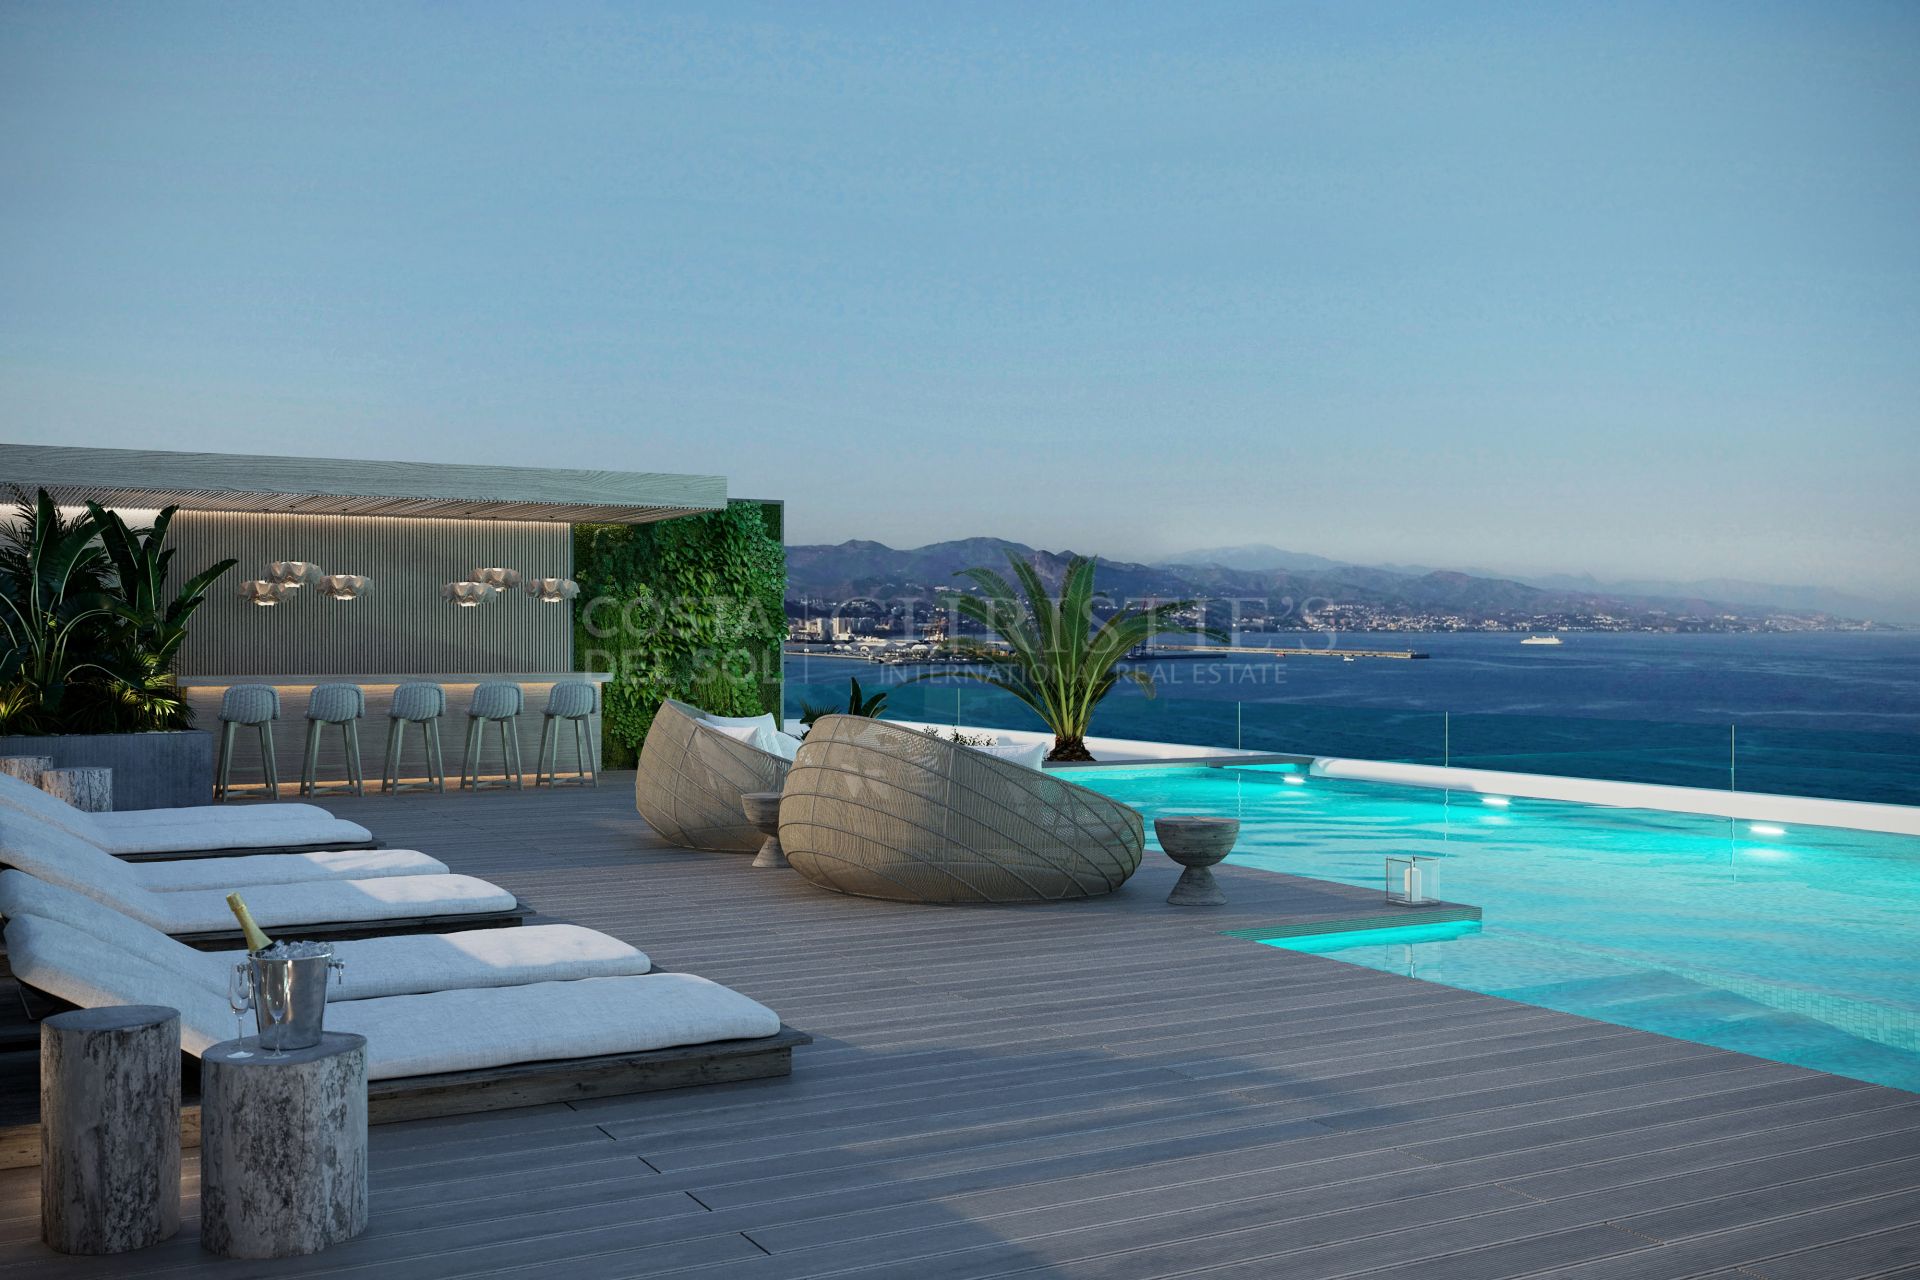 LUXURY MODERN APARTMENTS ON THE SEAFRONT WITH SPECTACULAR VIEWS